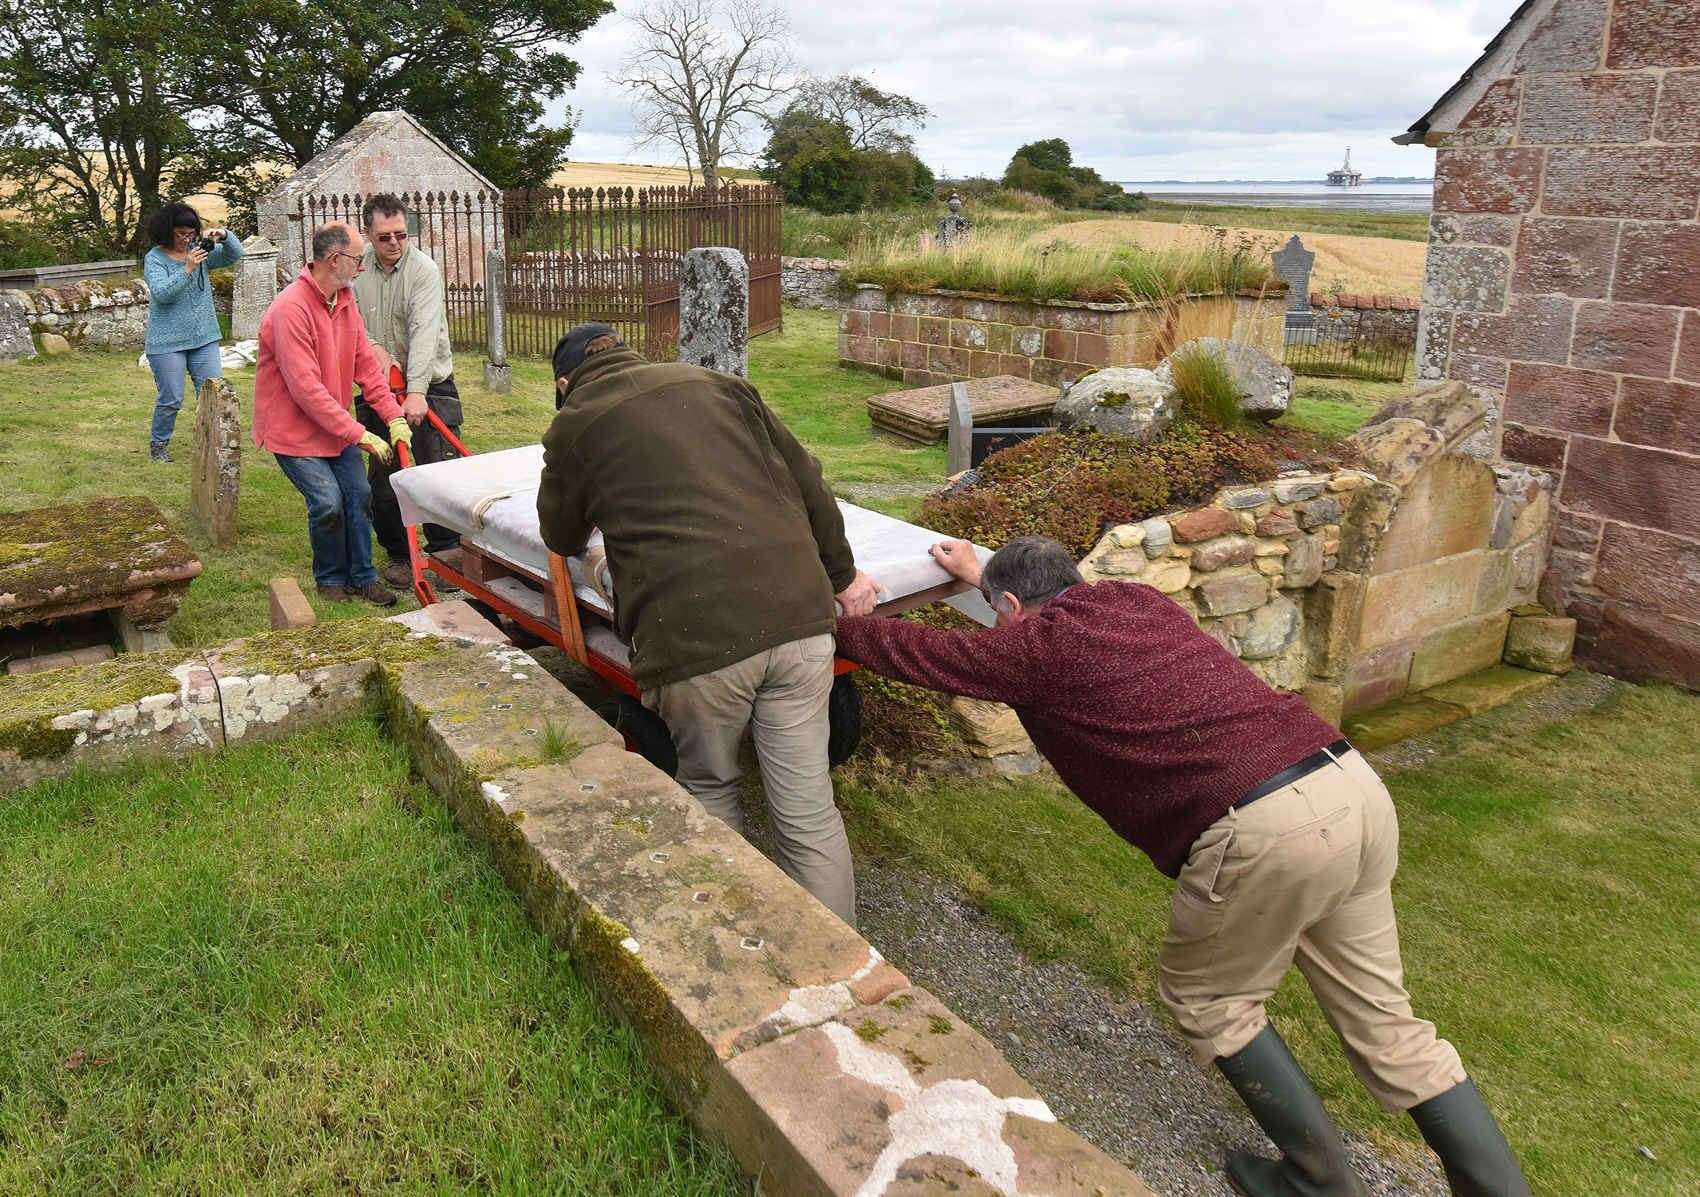 Removal of the stone and its ultimate replacement represented a significant effort for volunteers determined to show respect to the woman who wished to honour her parents.